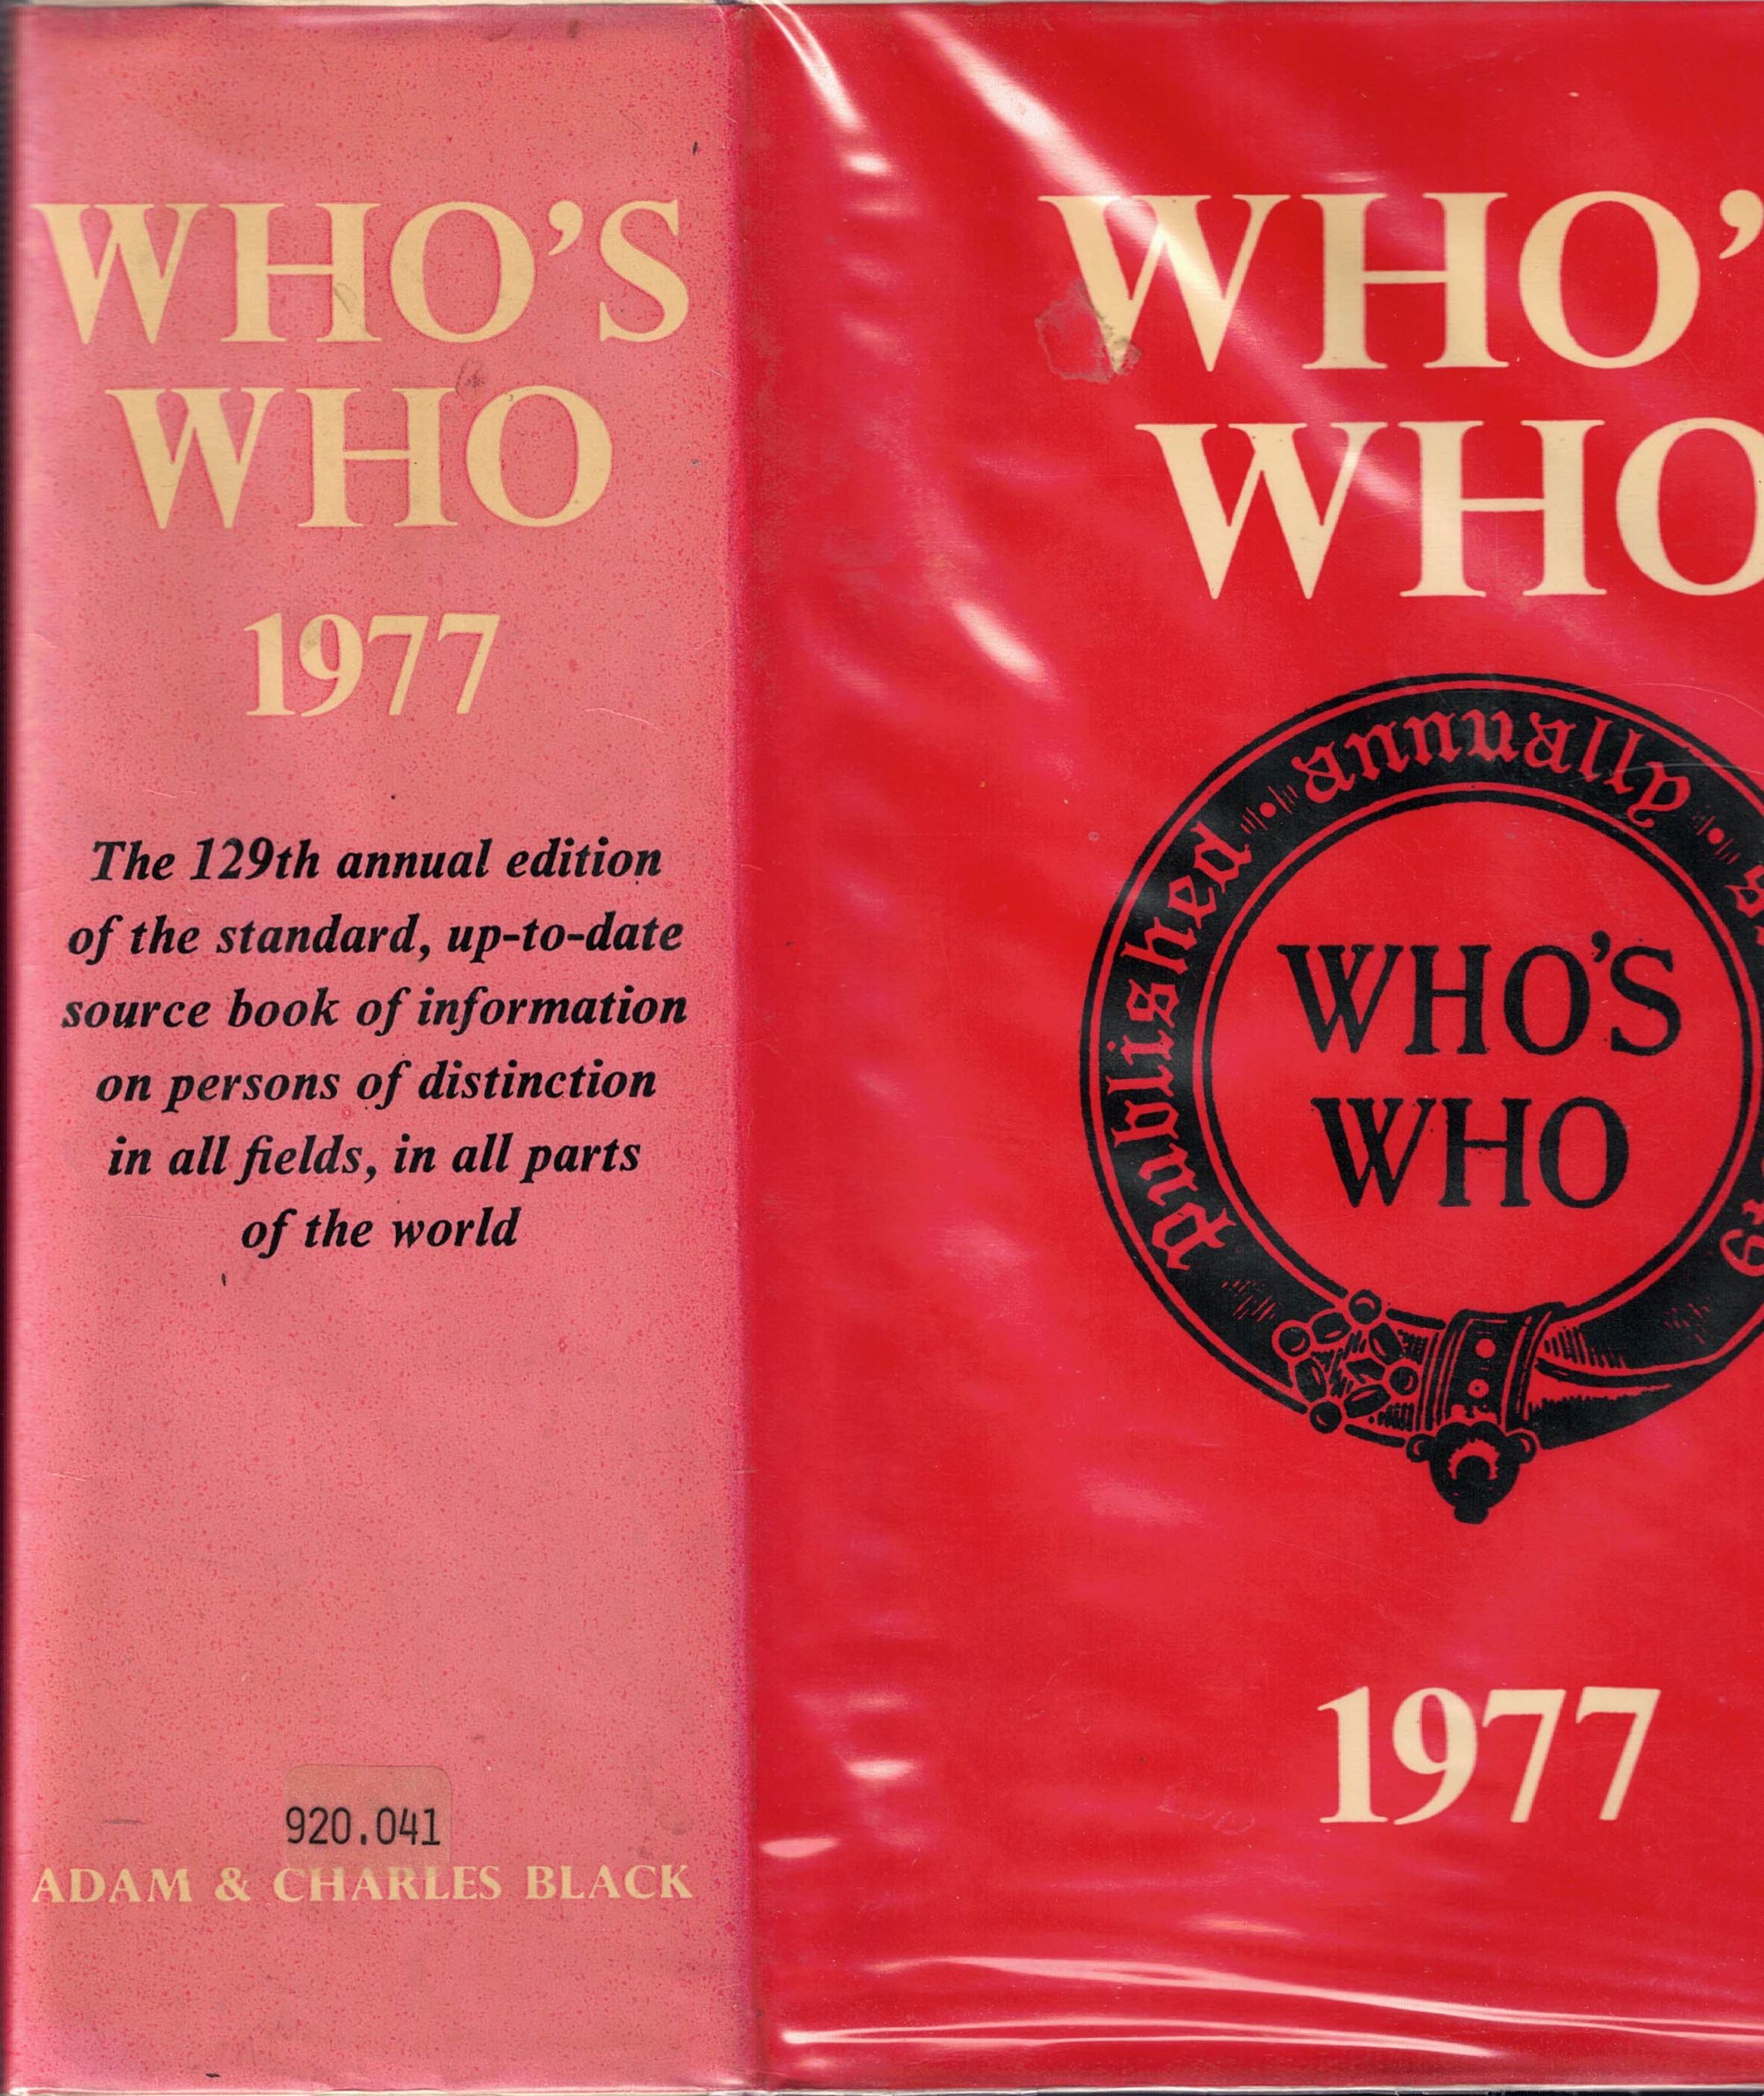 Who's Who 1977. An Annual Biographical Dictionary.